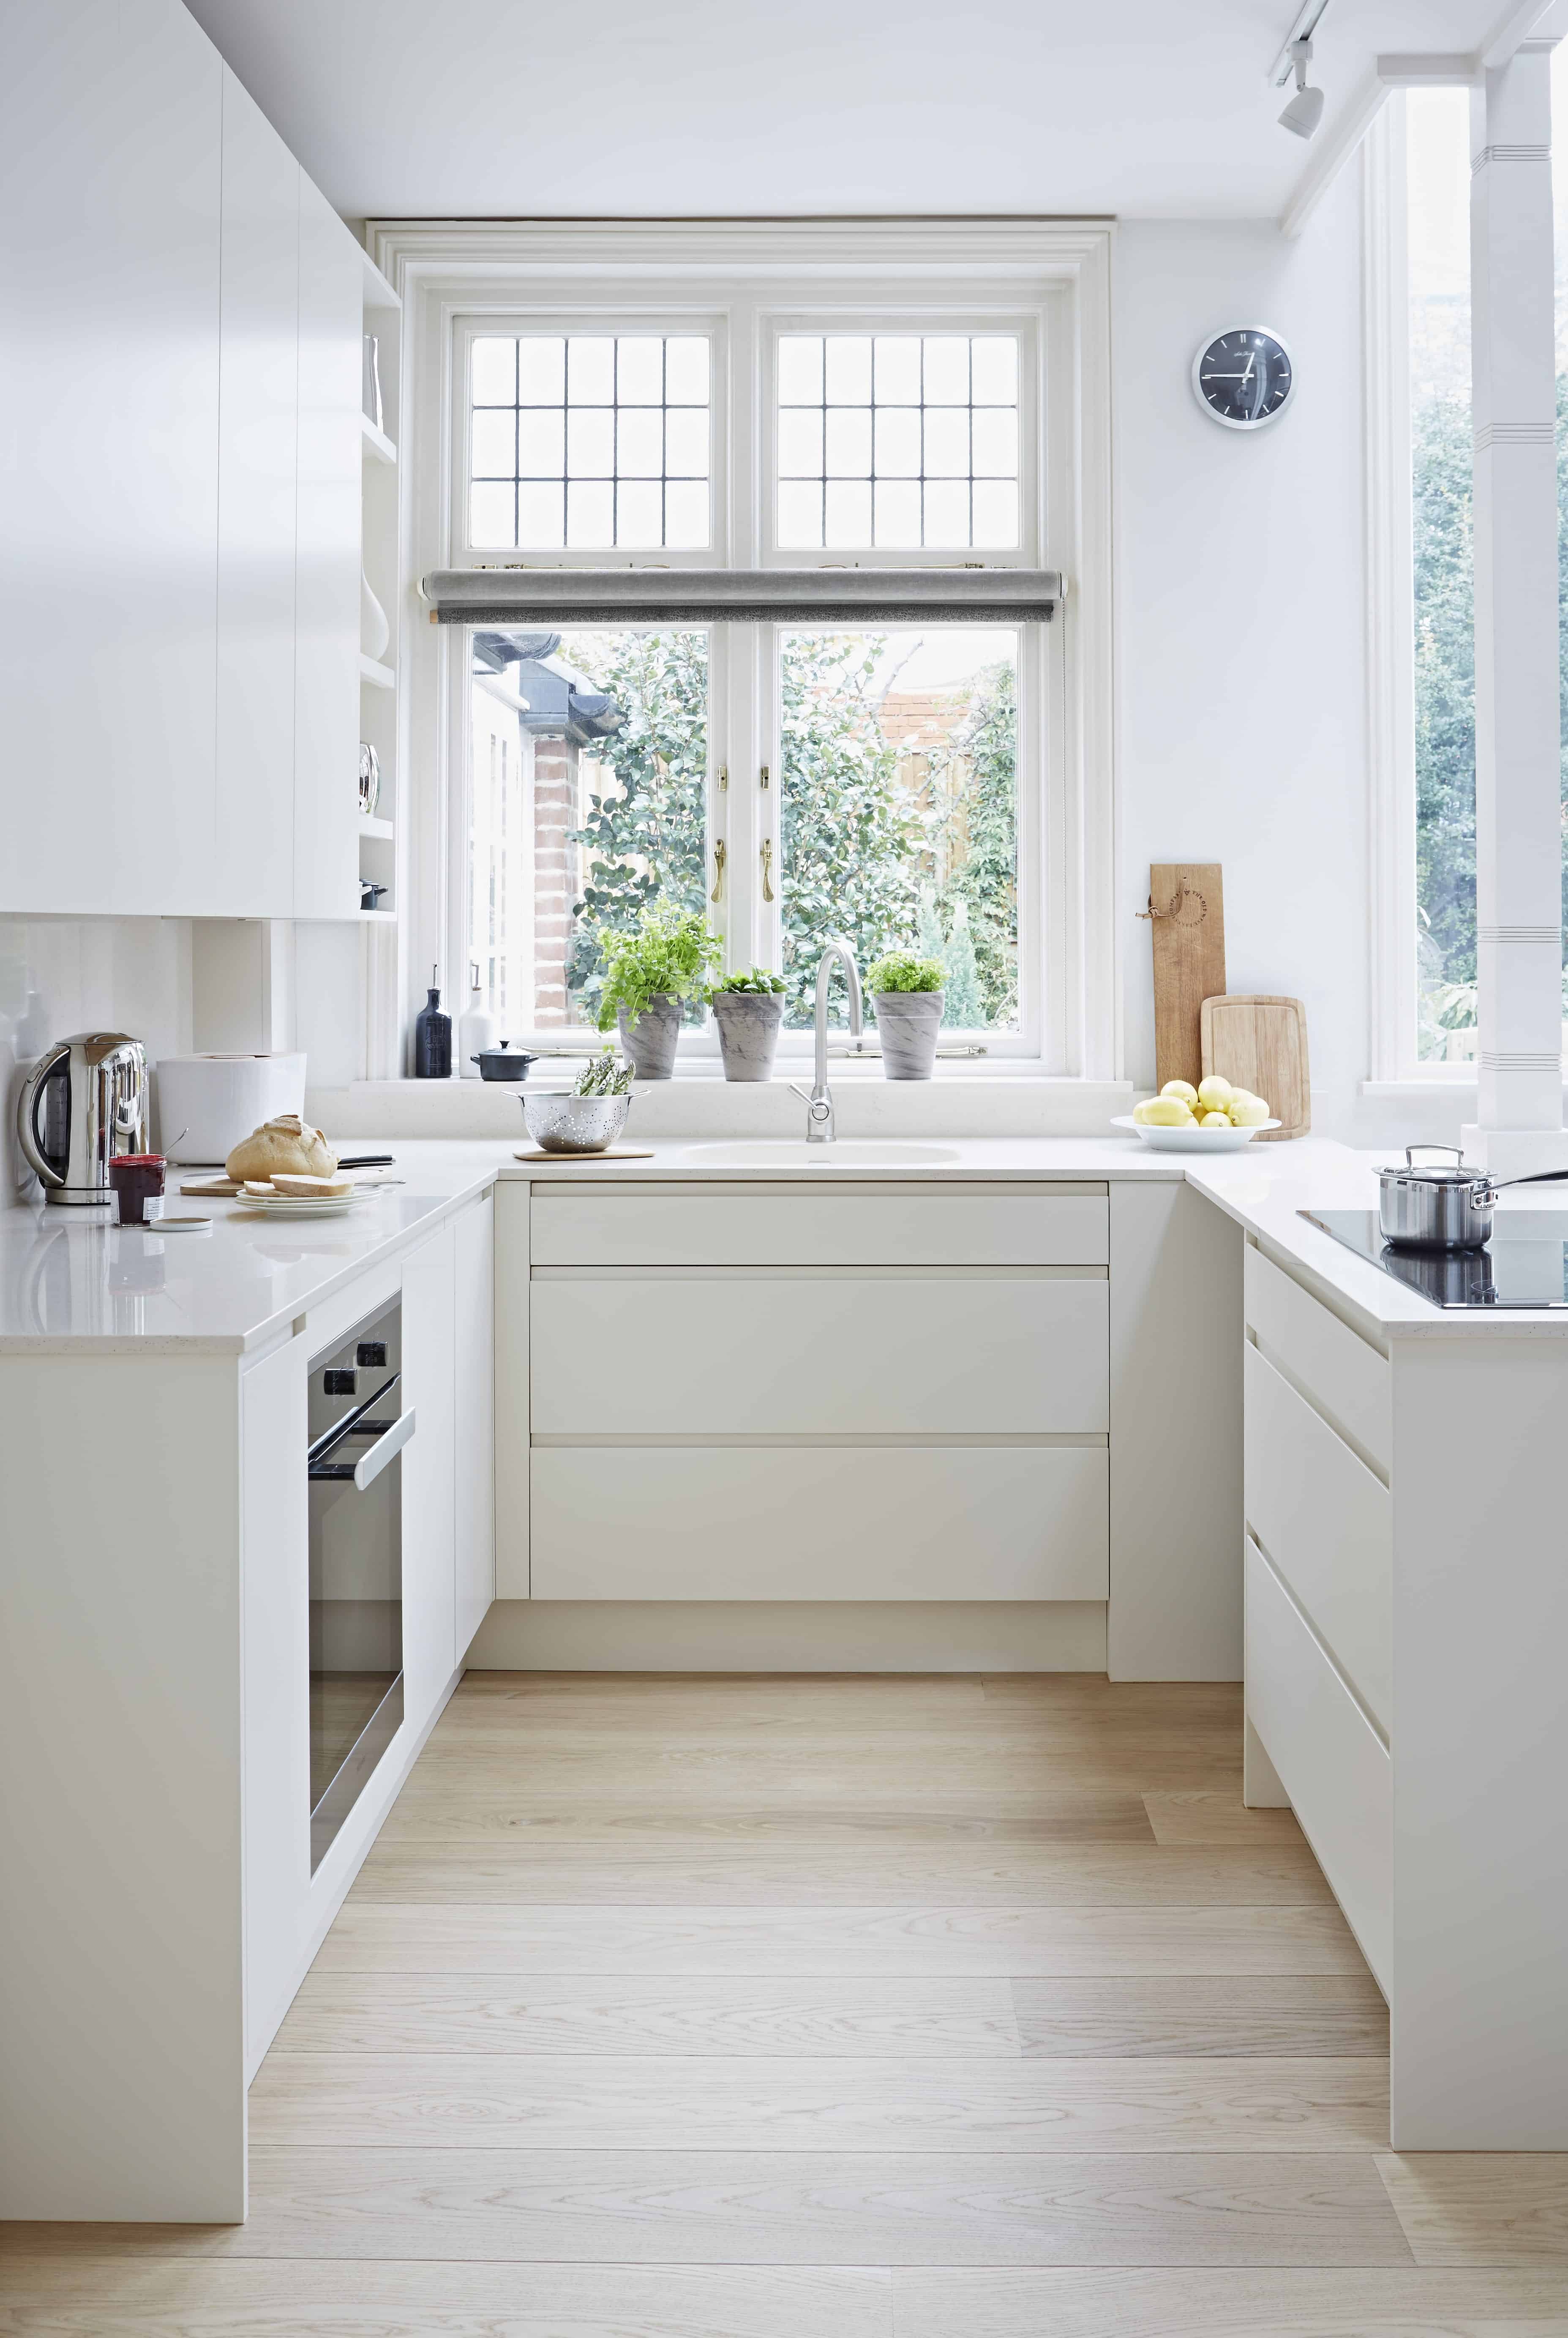 18 Simple Ways to Make Your Small Kitchen Feel Larger